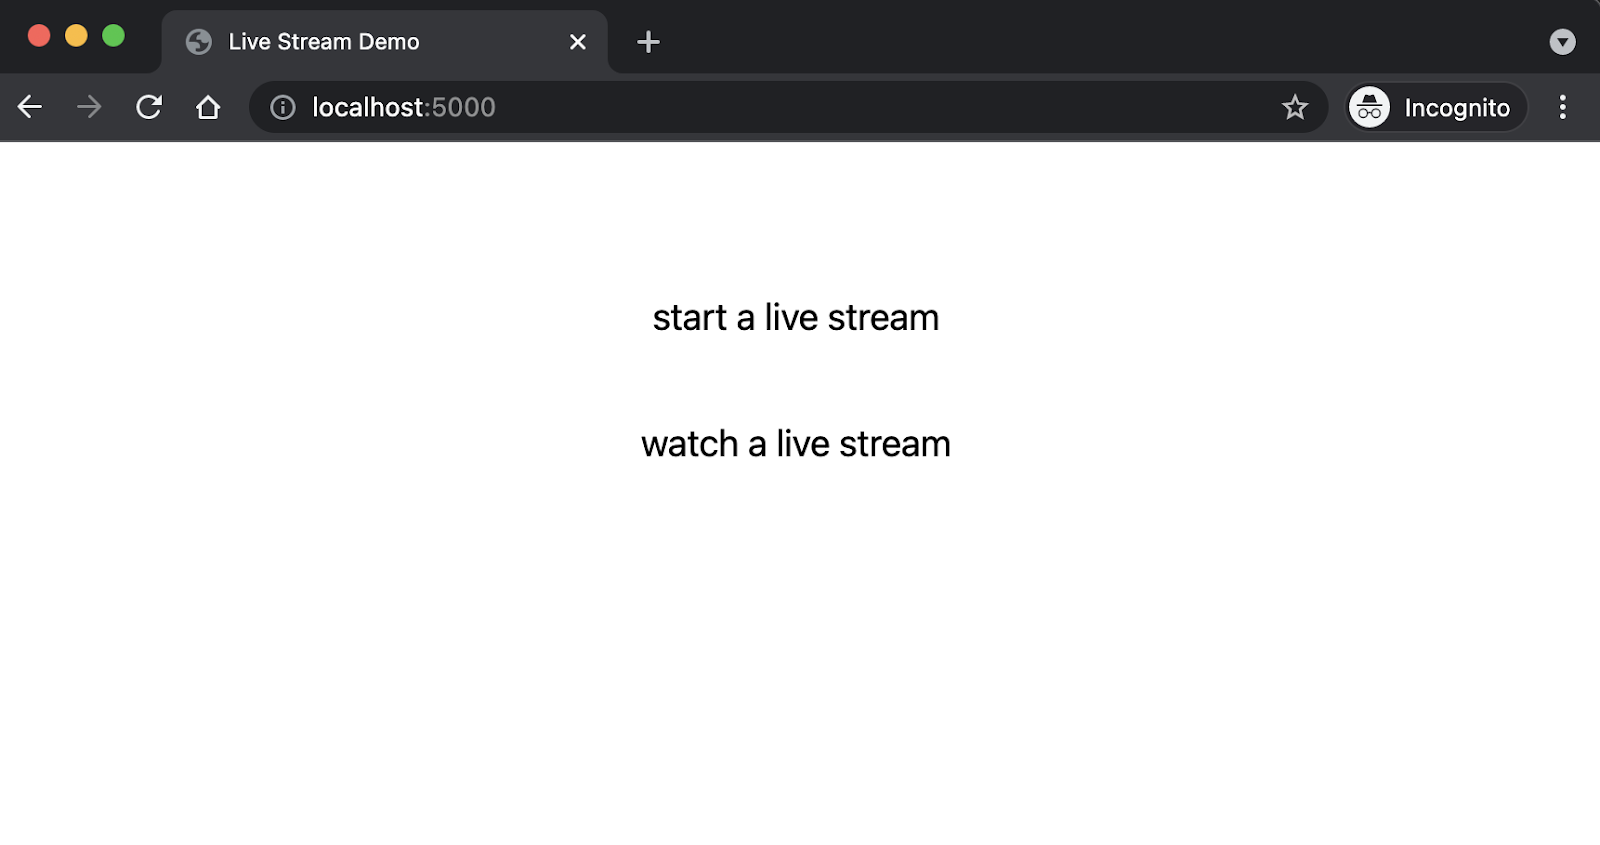 UI showing two links: "start a live stream" and "watch a live stream"